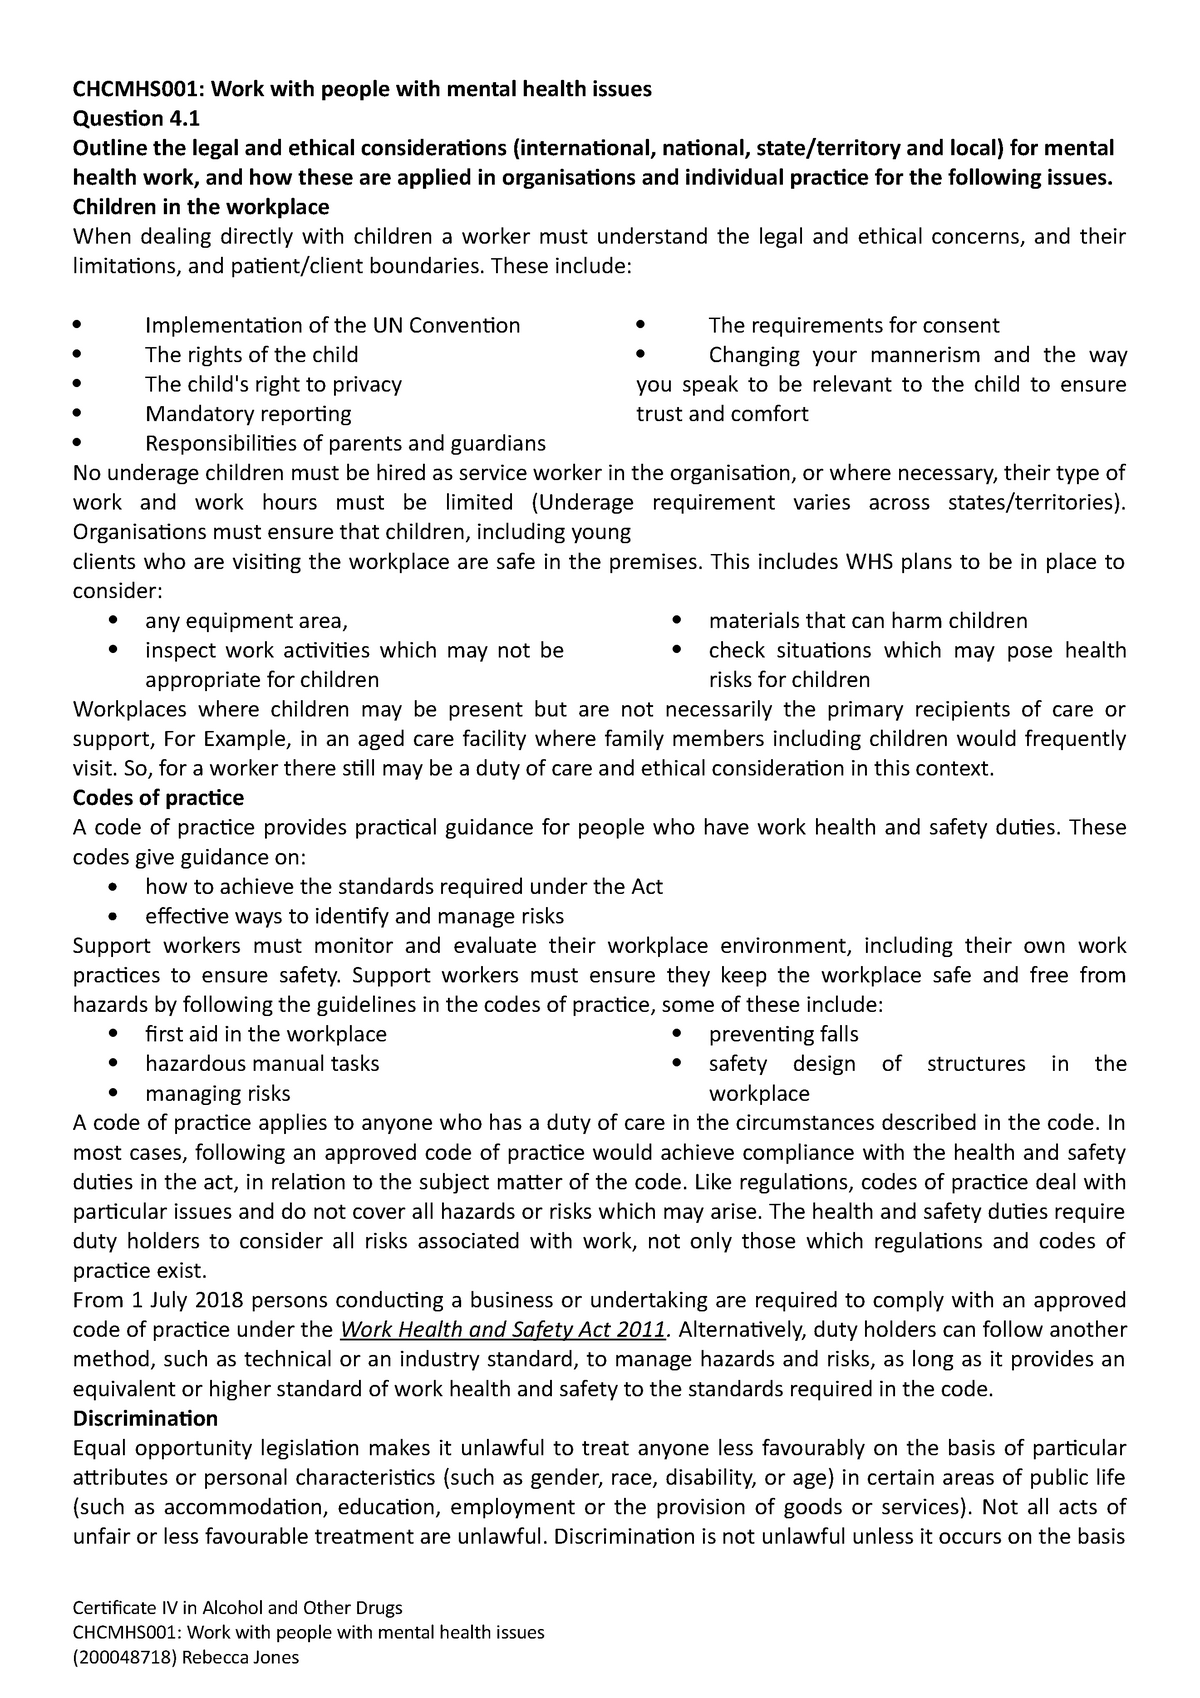 unit 4 legal and ethical responsibilities assignment sheet answers